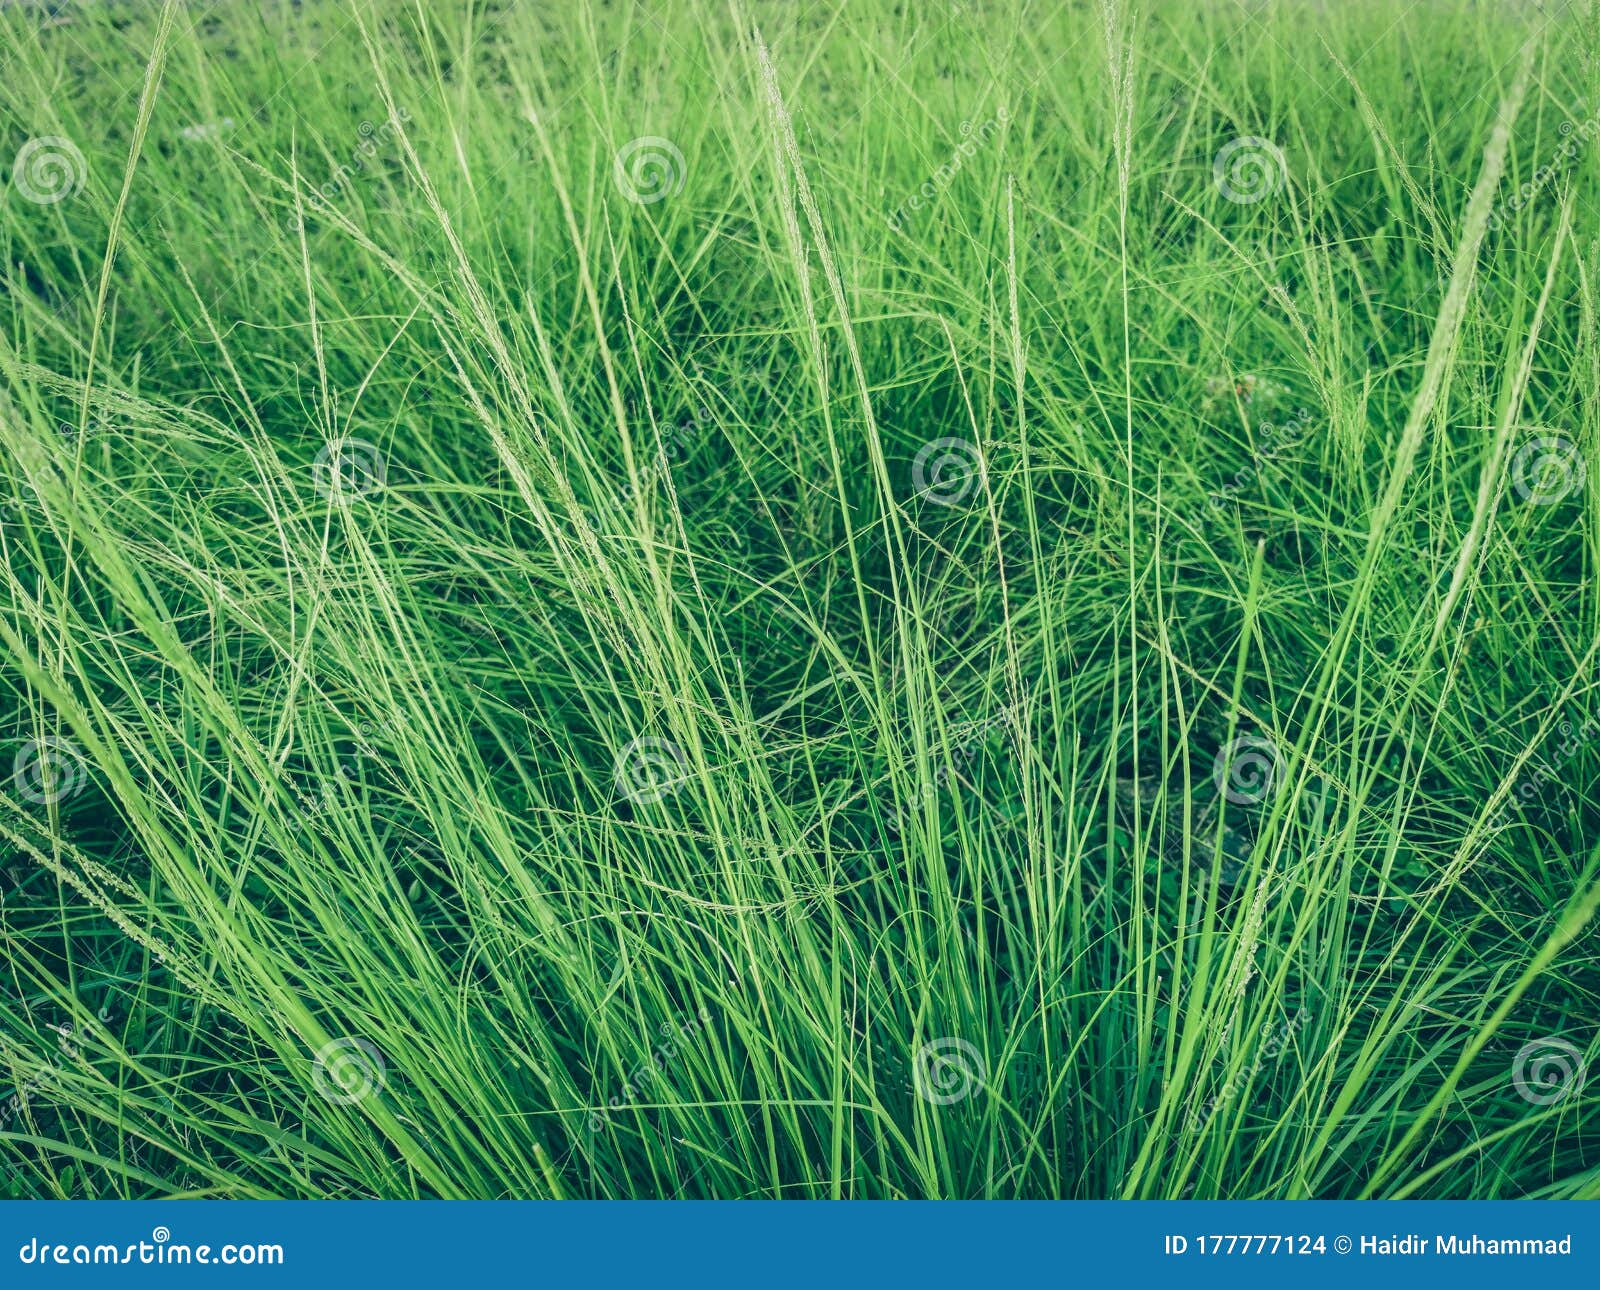 Nature View of Lush Green Grass for Background and Wallpaper. Natural